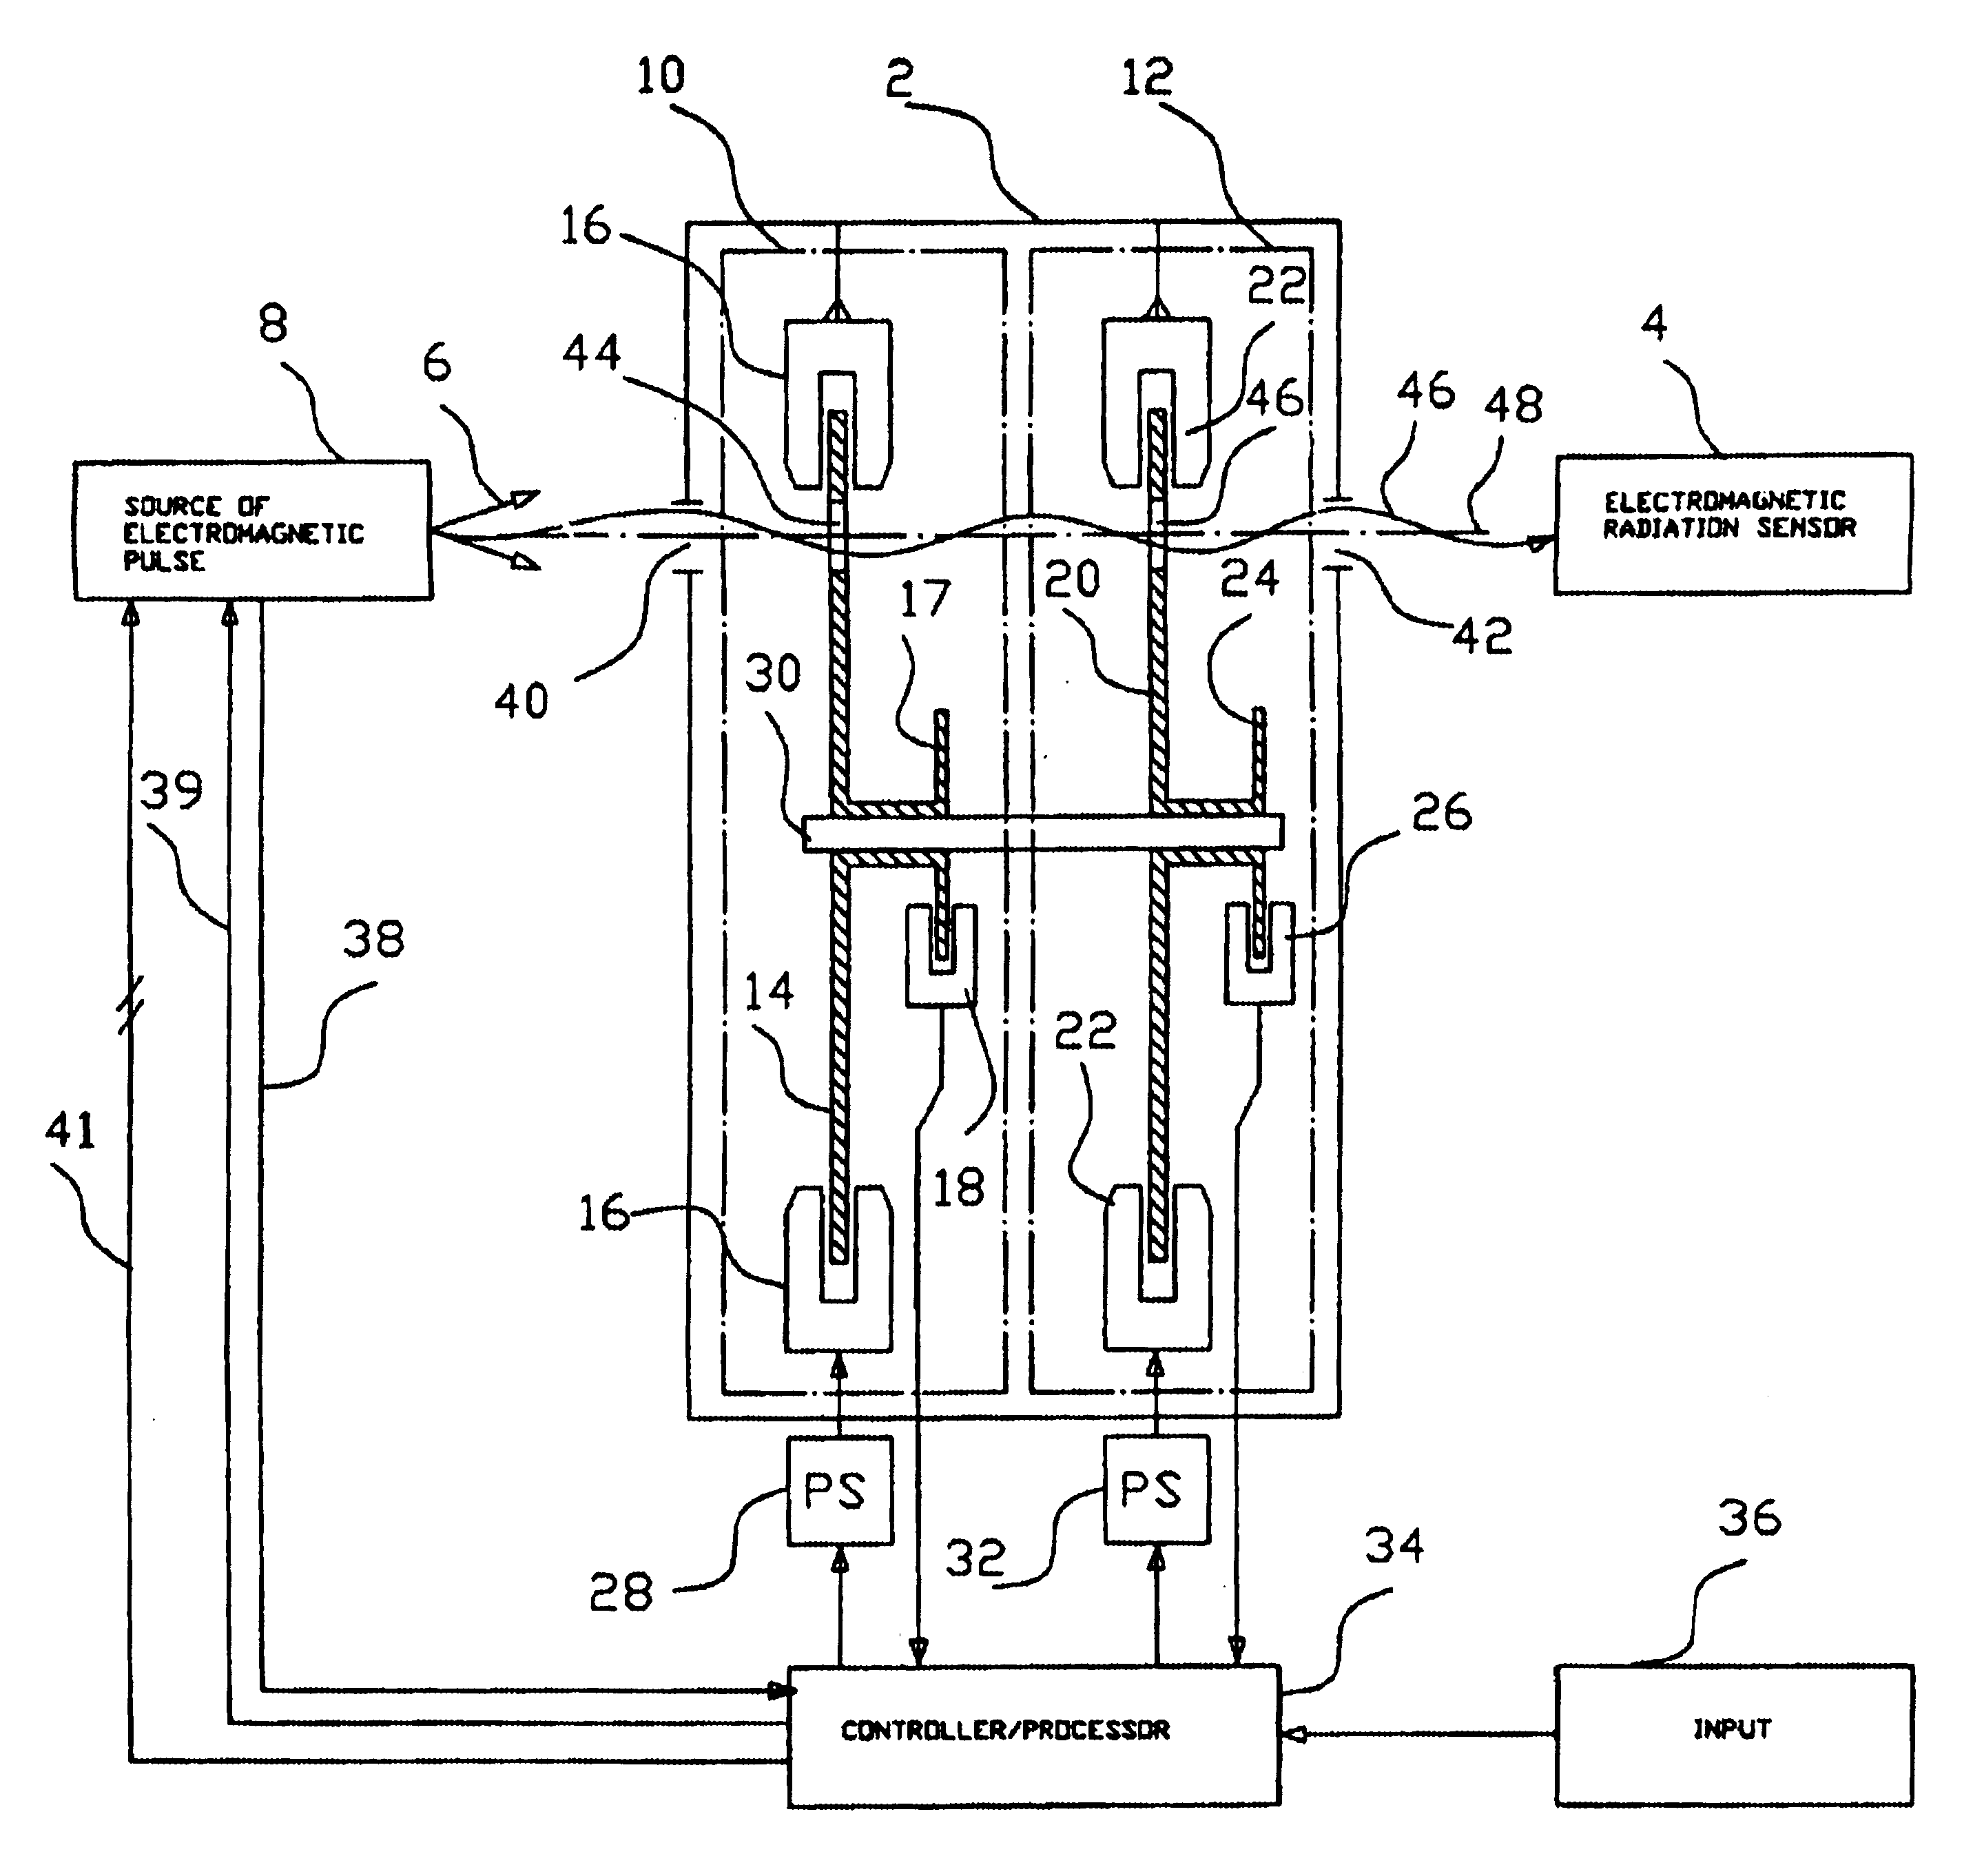 Method and apparatus for ultra-fast aperture exposure